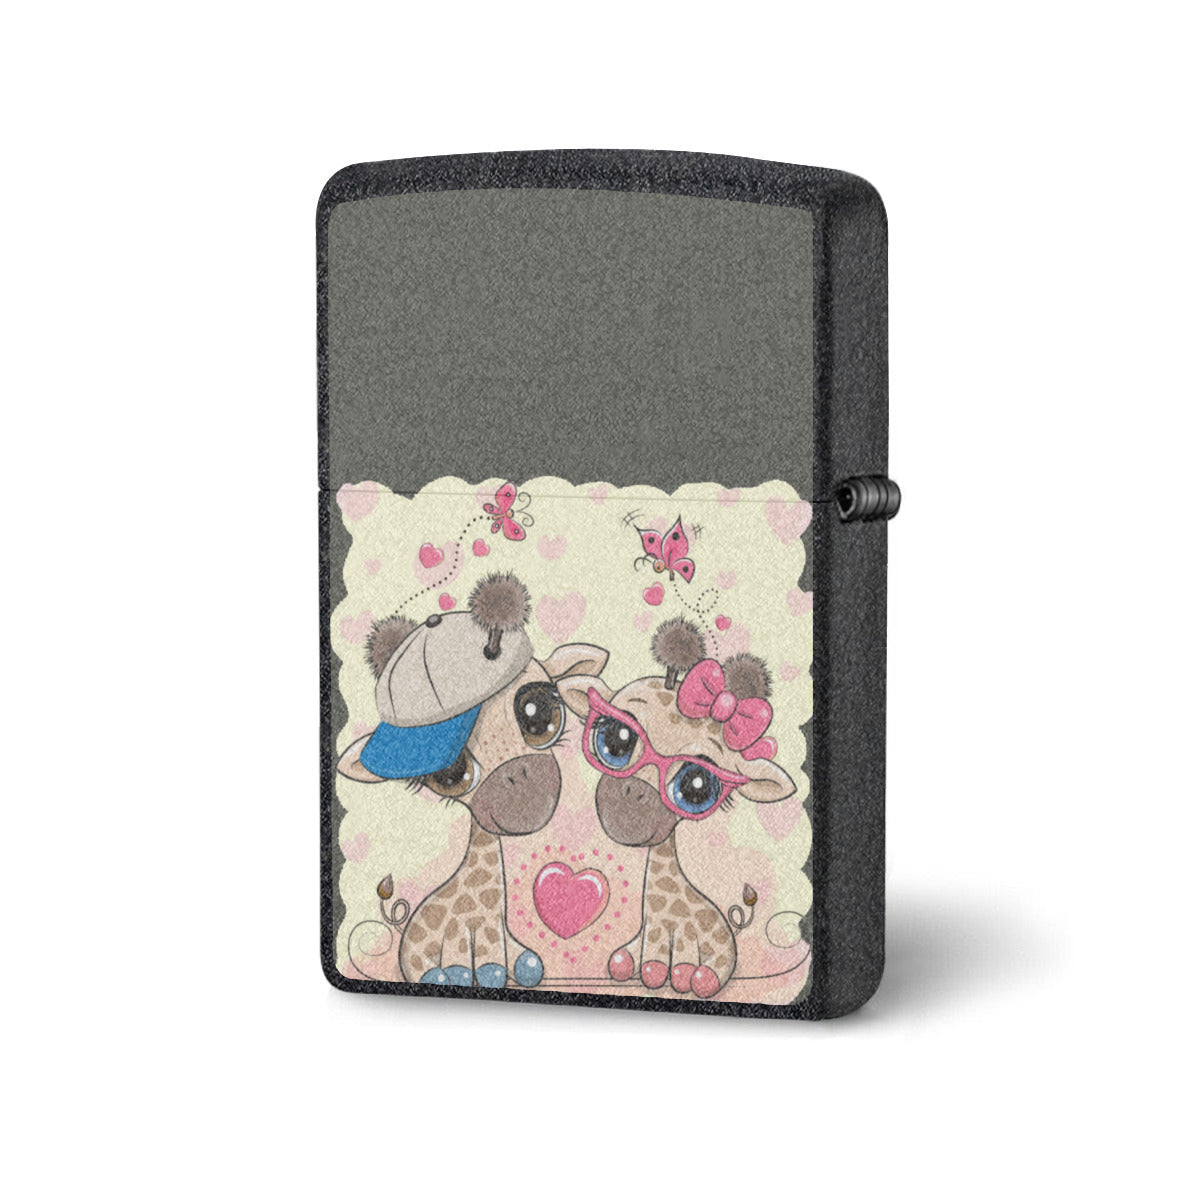 Spark Up the Romance: Lighter Case Couple Valentine Edition! Home-clothes-jewelry